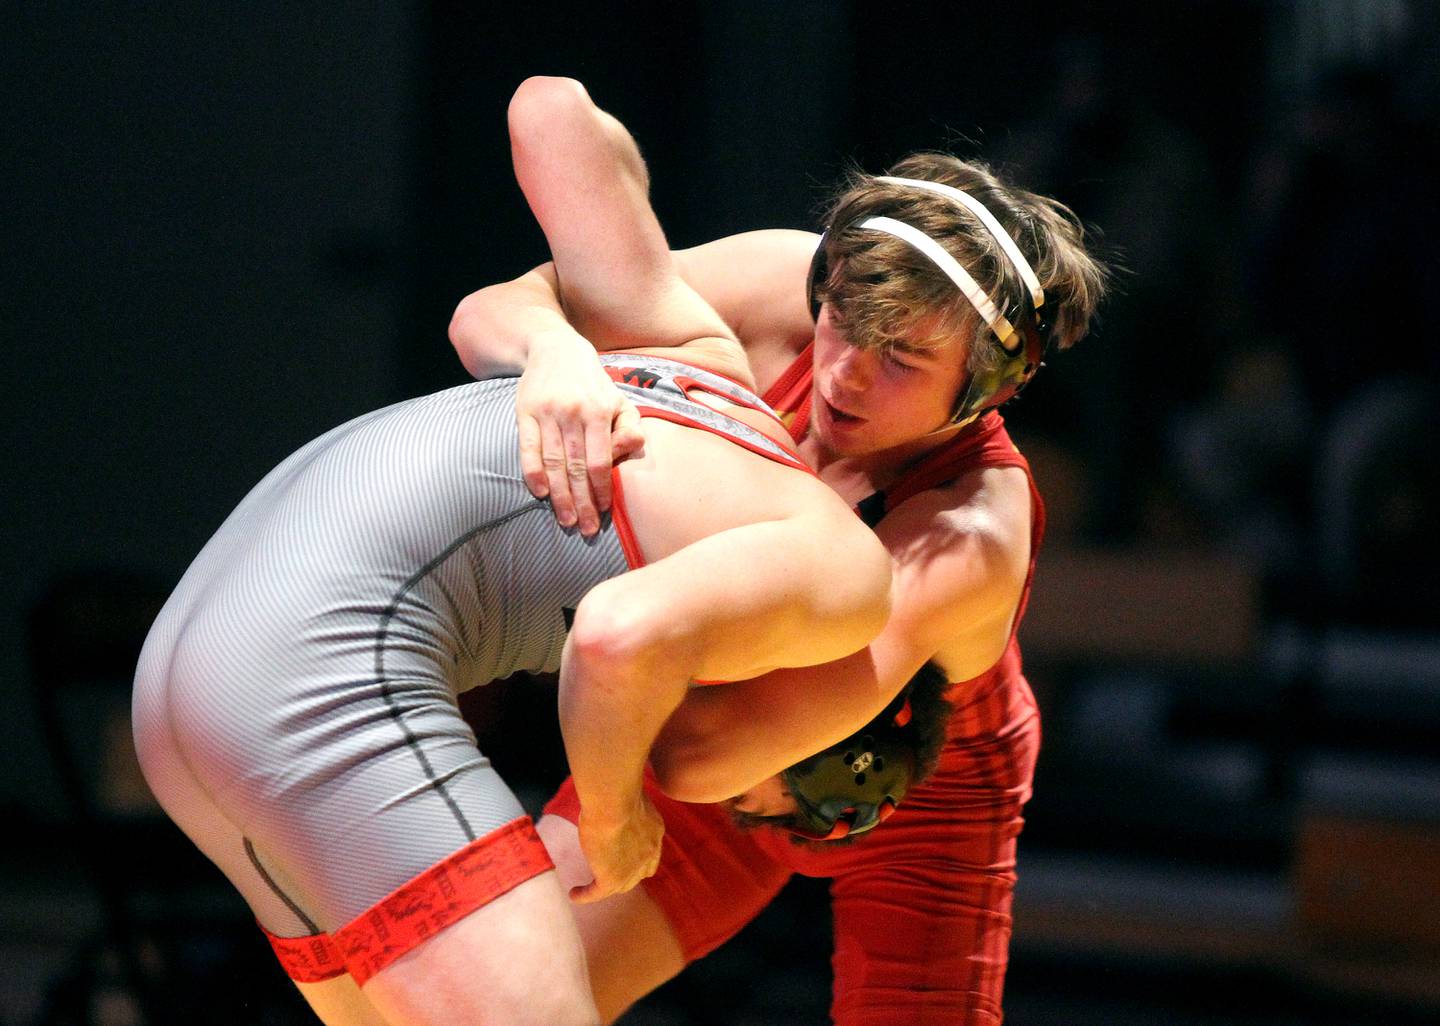 Batavia's Cael Andrews (top) competes against Yorkville's Cole Farren in the 145-pound weight class in a dual meet at Batavia on Wednesday, Jan. 26, 2022.